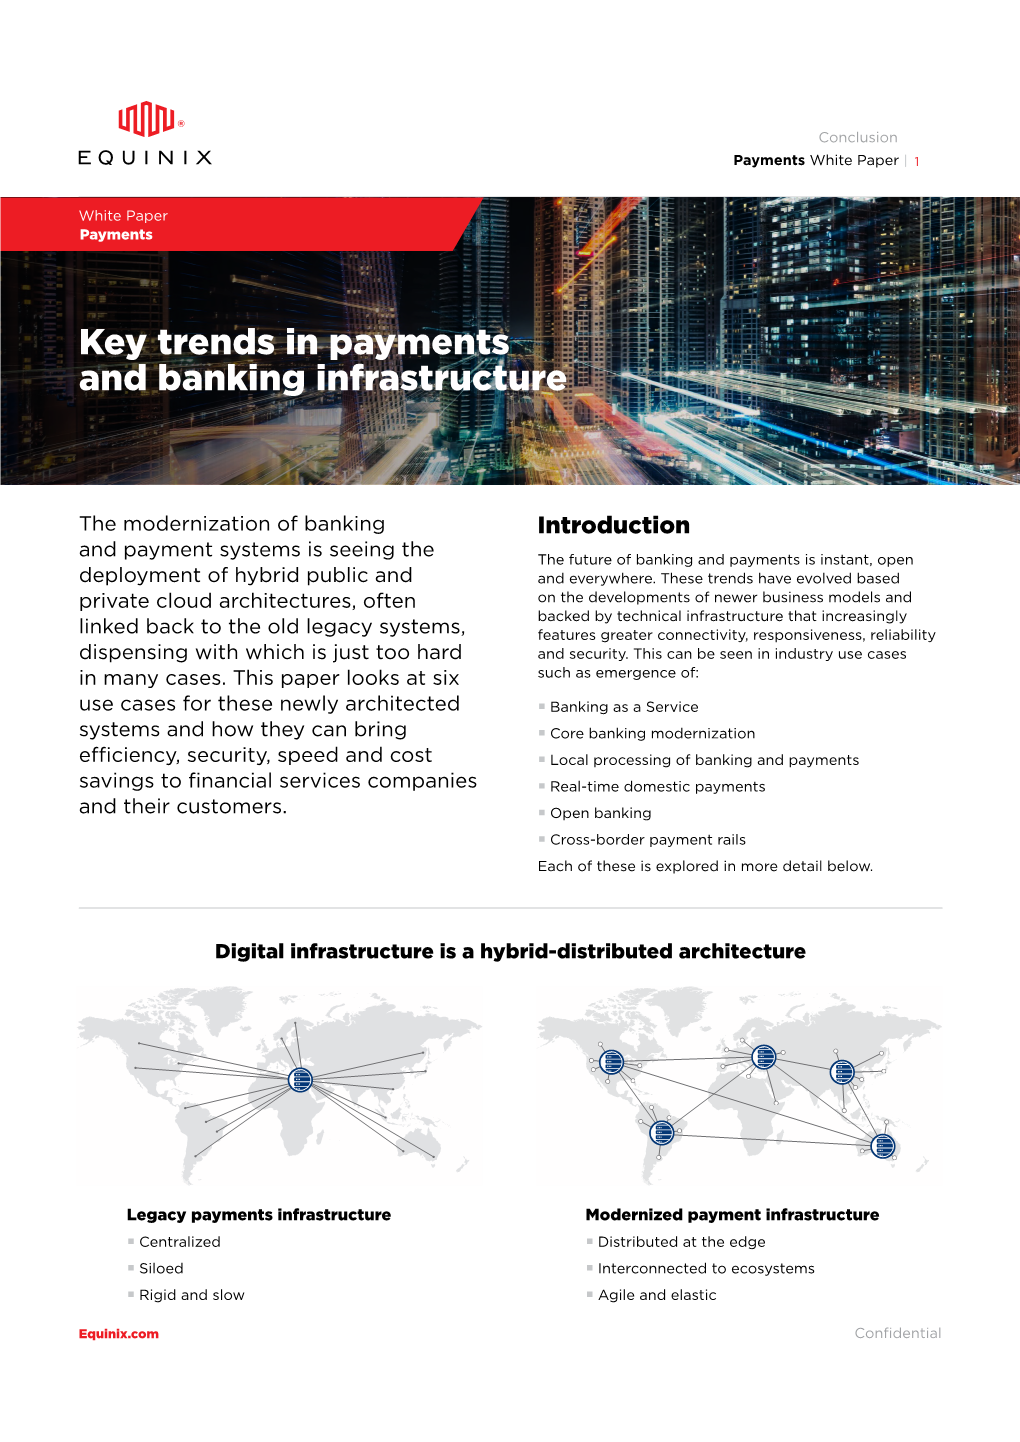 Key Trends in Payments and Banking Infrastructure